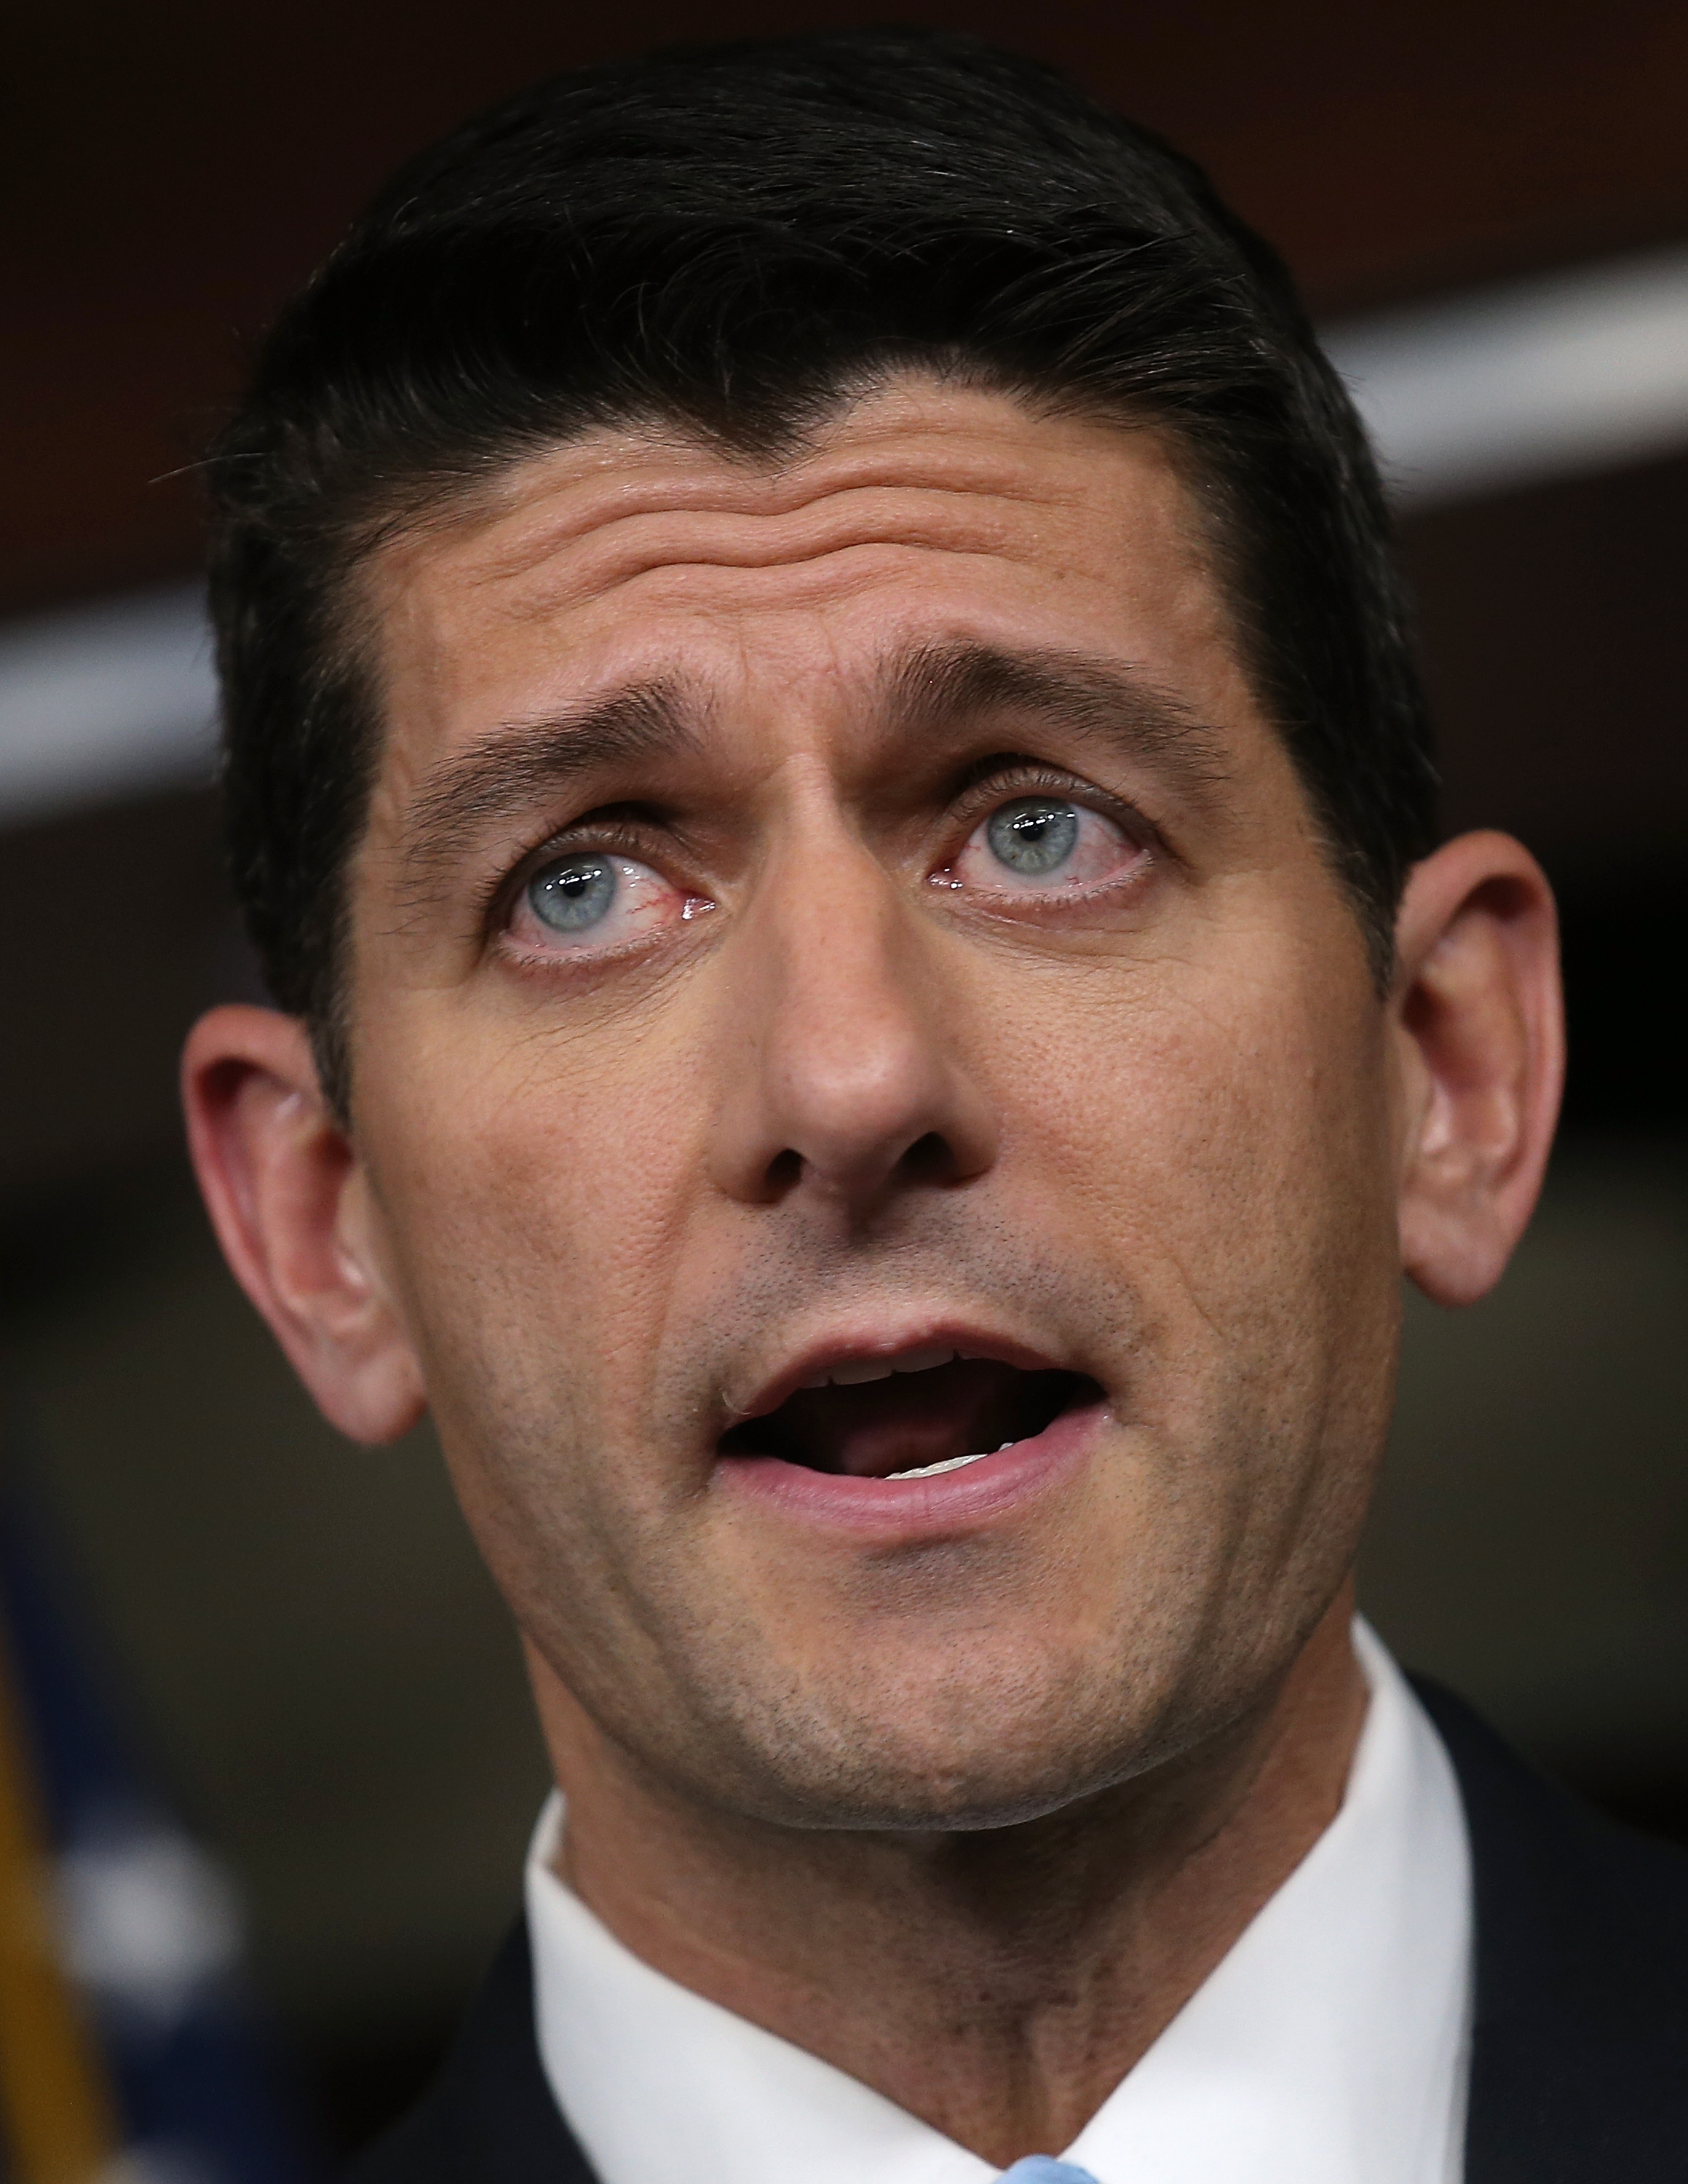 WASHINGTON, DC - OCTOBER 20:  Rep. Paul Ryan (R-WI) speaks following a meeting of House Republicans at the U.S. Capitol October 20, 2015 in Washington, DC. Ryan has said he is willing to be the next Speaker of the House if all House Republicans endorse him for the position.  (Photo by Win McNamee/Getty Images) (Win McNamee&mdash;Getty Images)